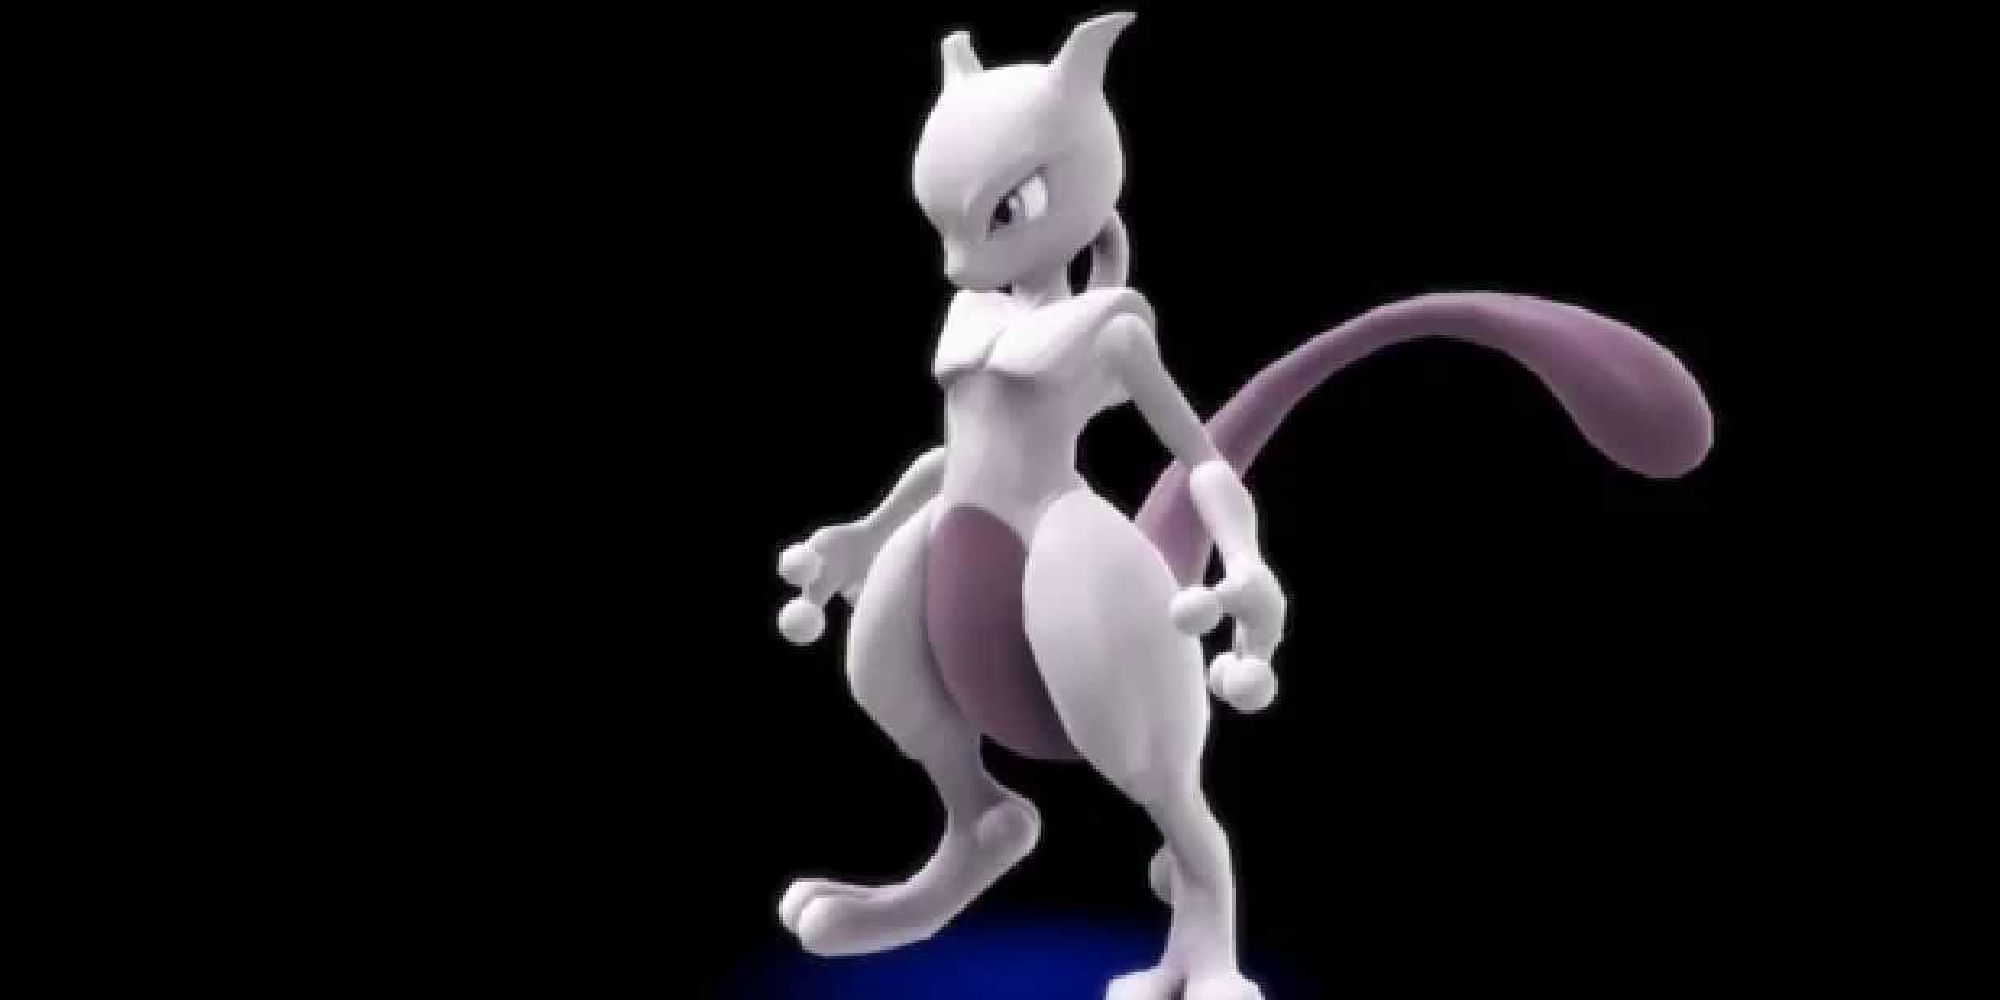 Mewtwo's character model in SSB4 as revealed in the 50-Fact Extravaganza